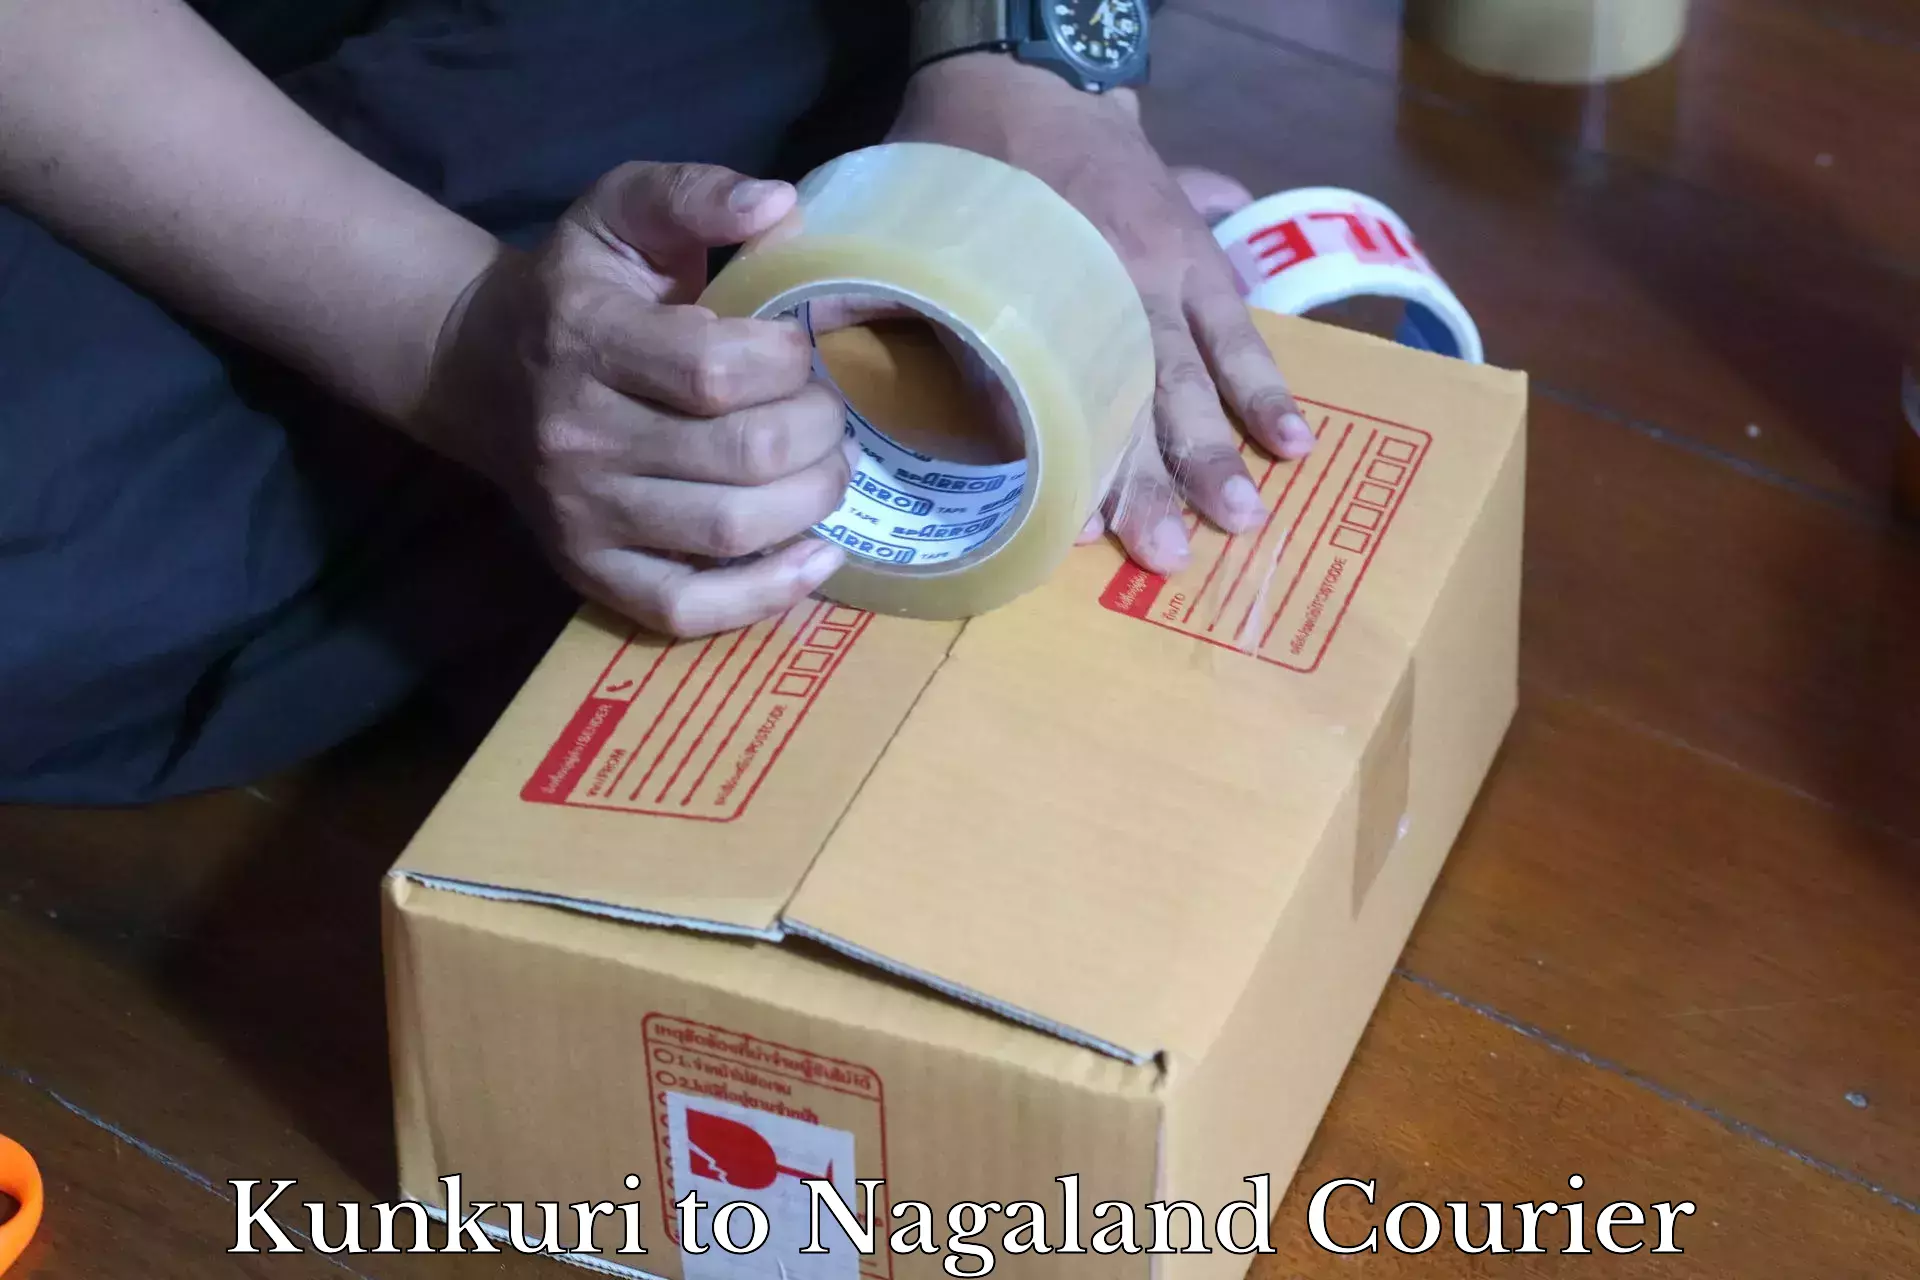 Courier service comparison in Kunkuri to Nagaland